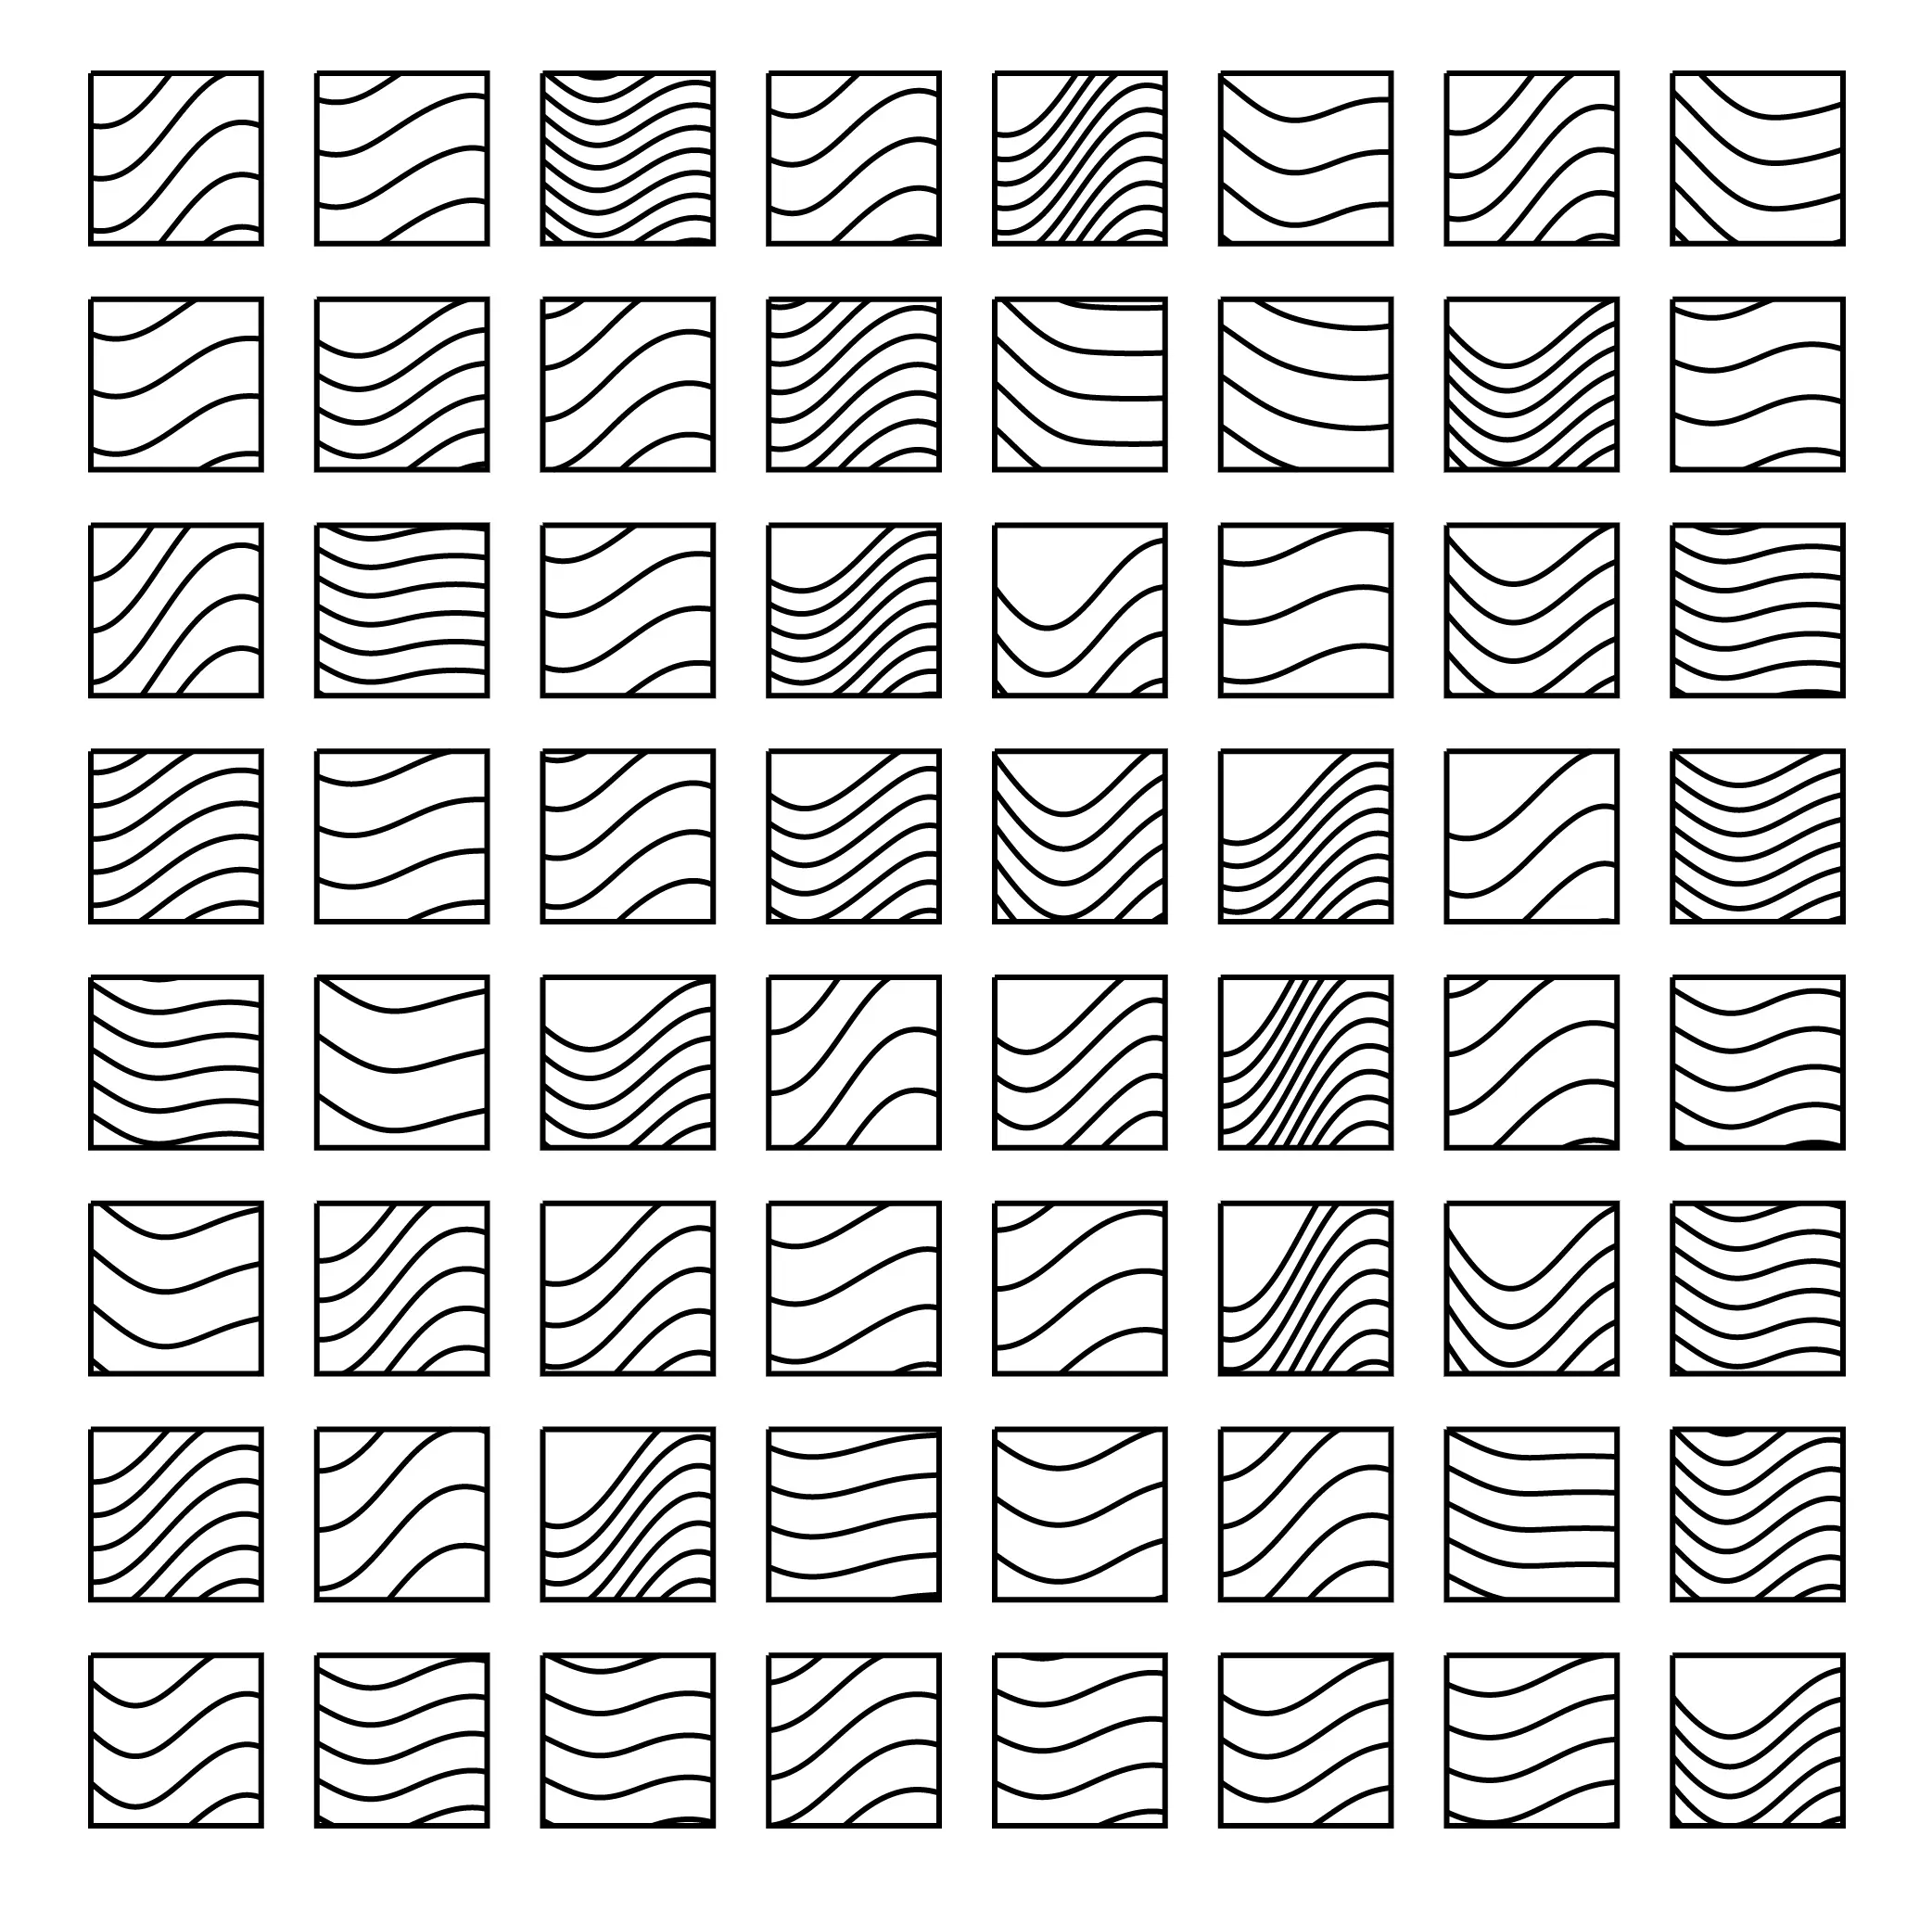 a grid of 8x8 cells where each cell is filled with a random number of squiggly lines